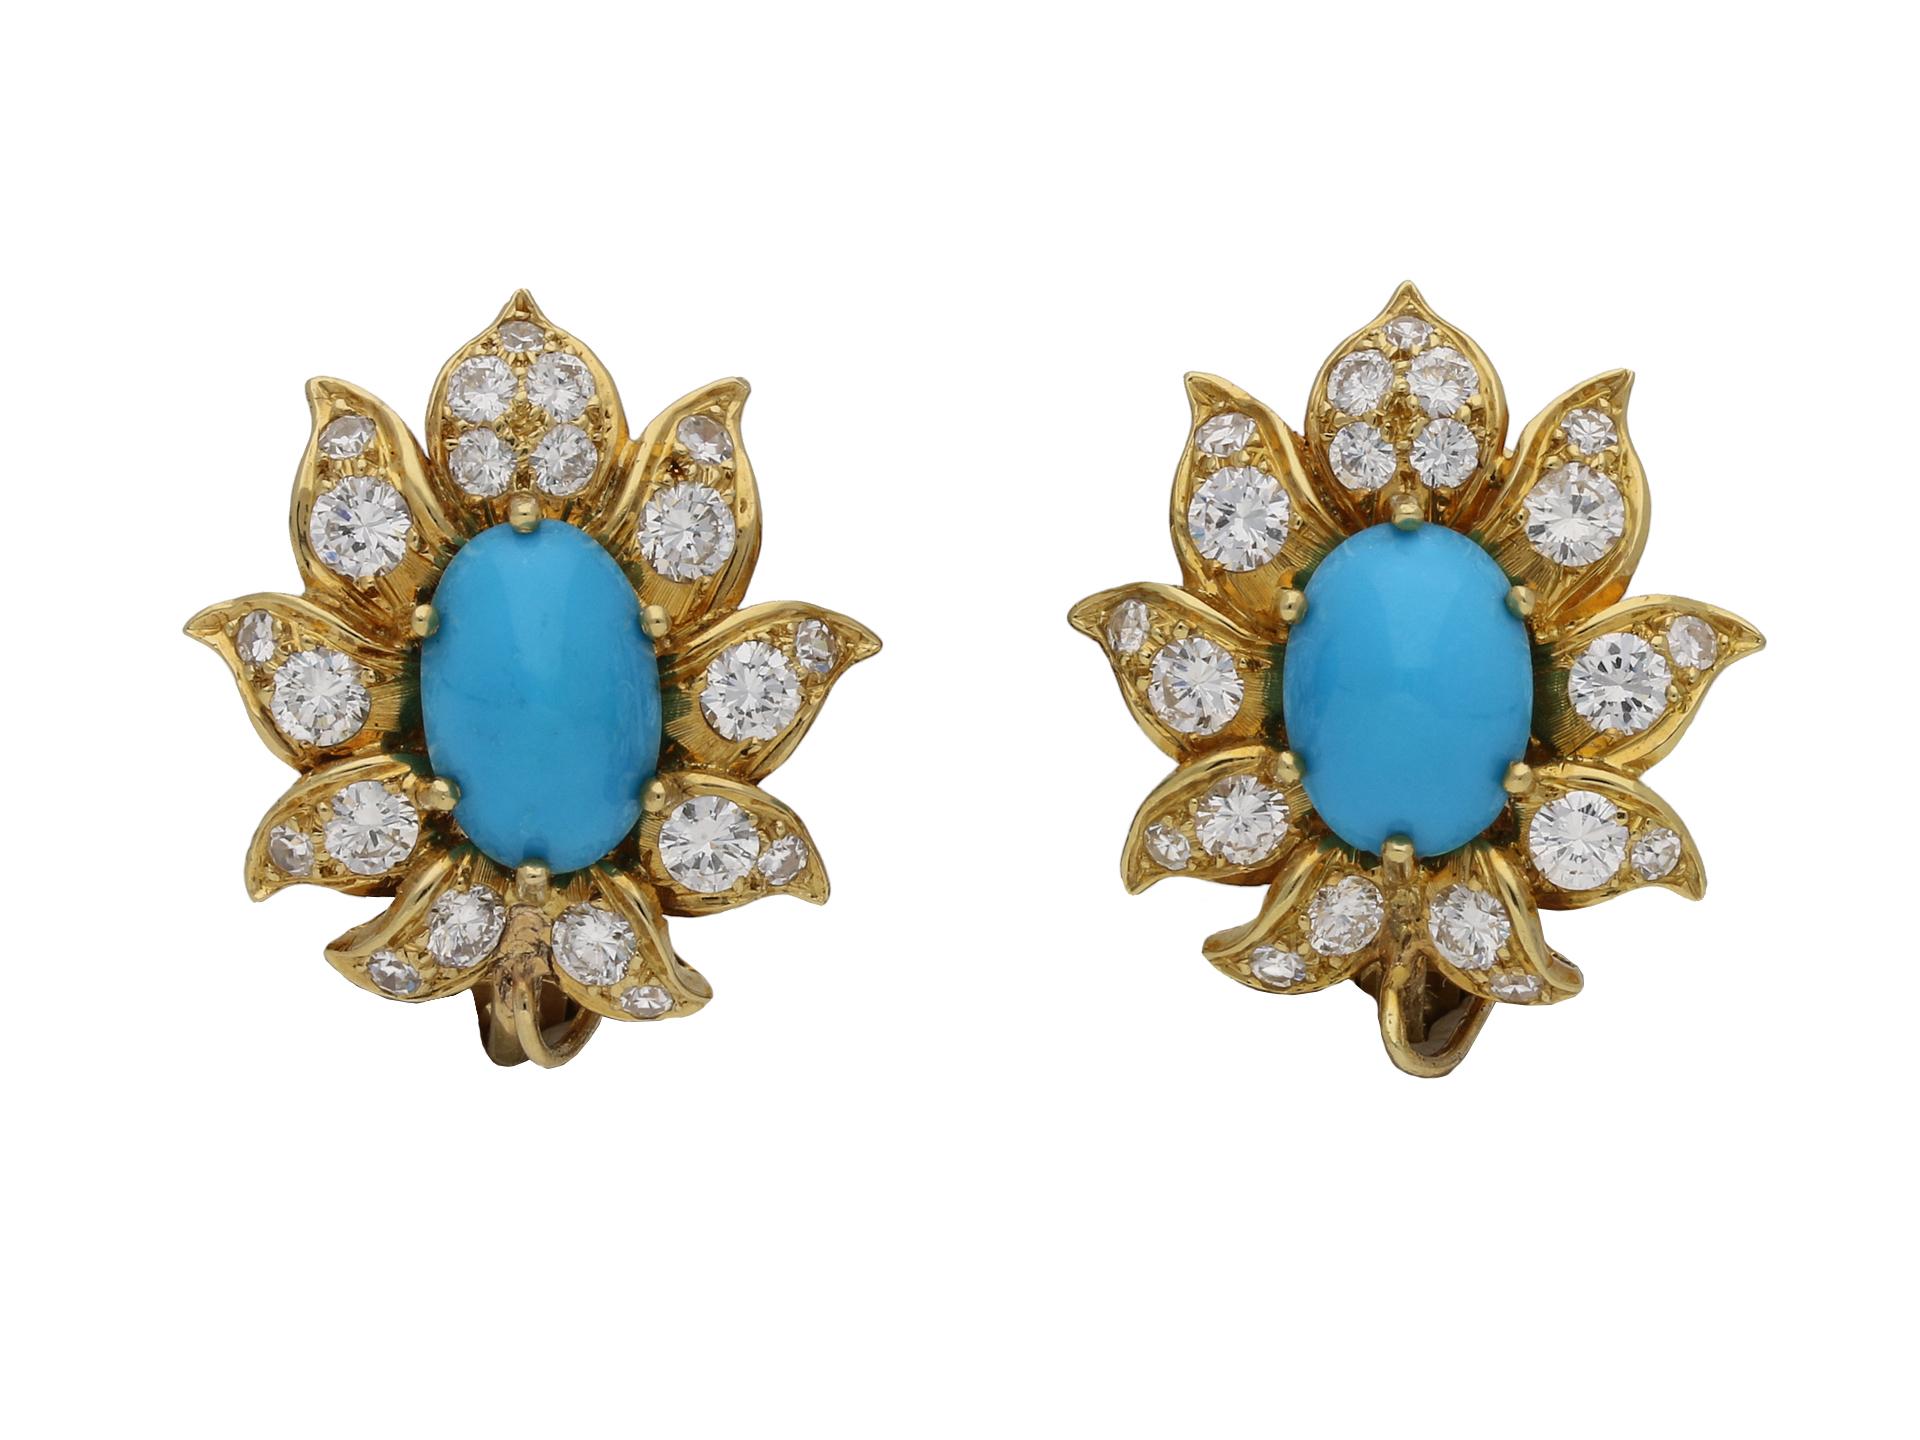 Vintage turquoise and diamond day and night clip earrings. A matching pair, set with two oval cabochon natural unenhanced turquoise to the lower drops with a combined weight of 10.00 carats, and two oval cabochon natural unenhanced turquoise to the